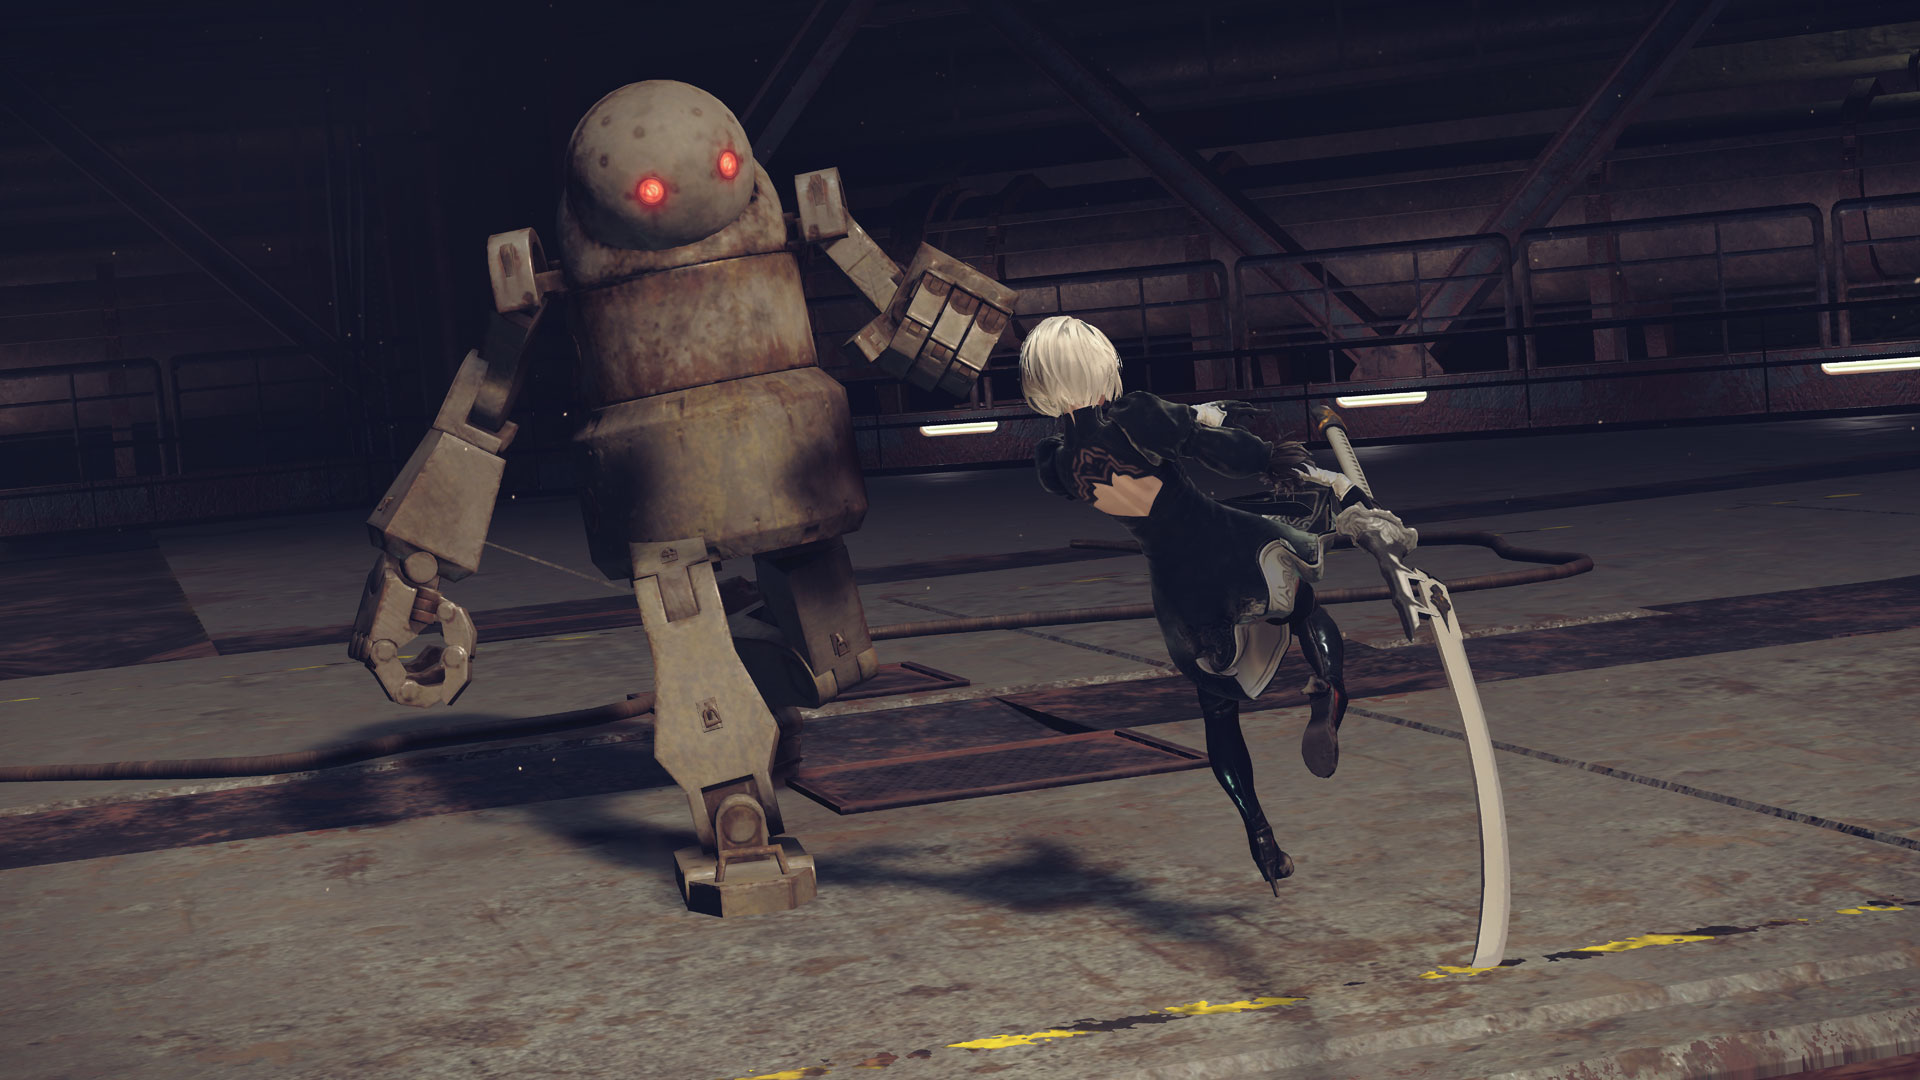 Automata reviewed | Ars Technica